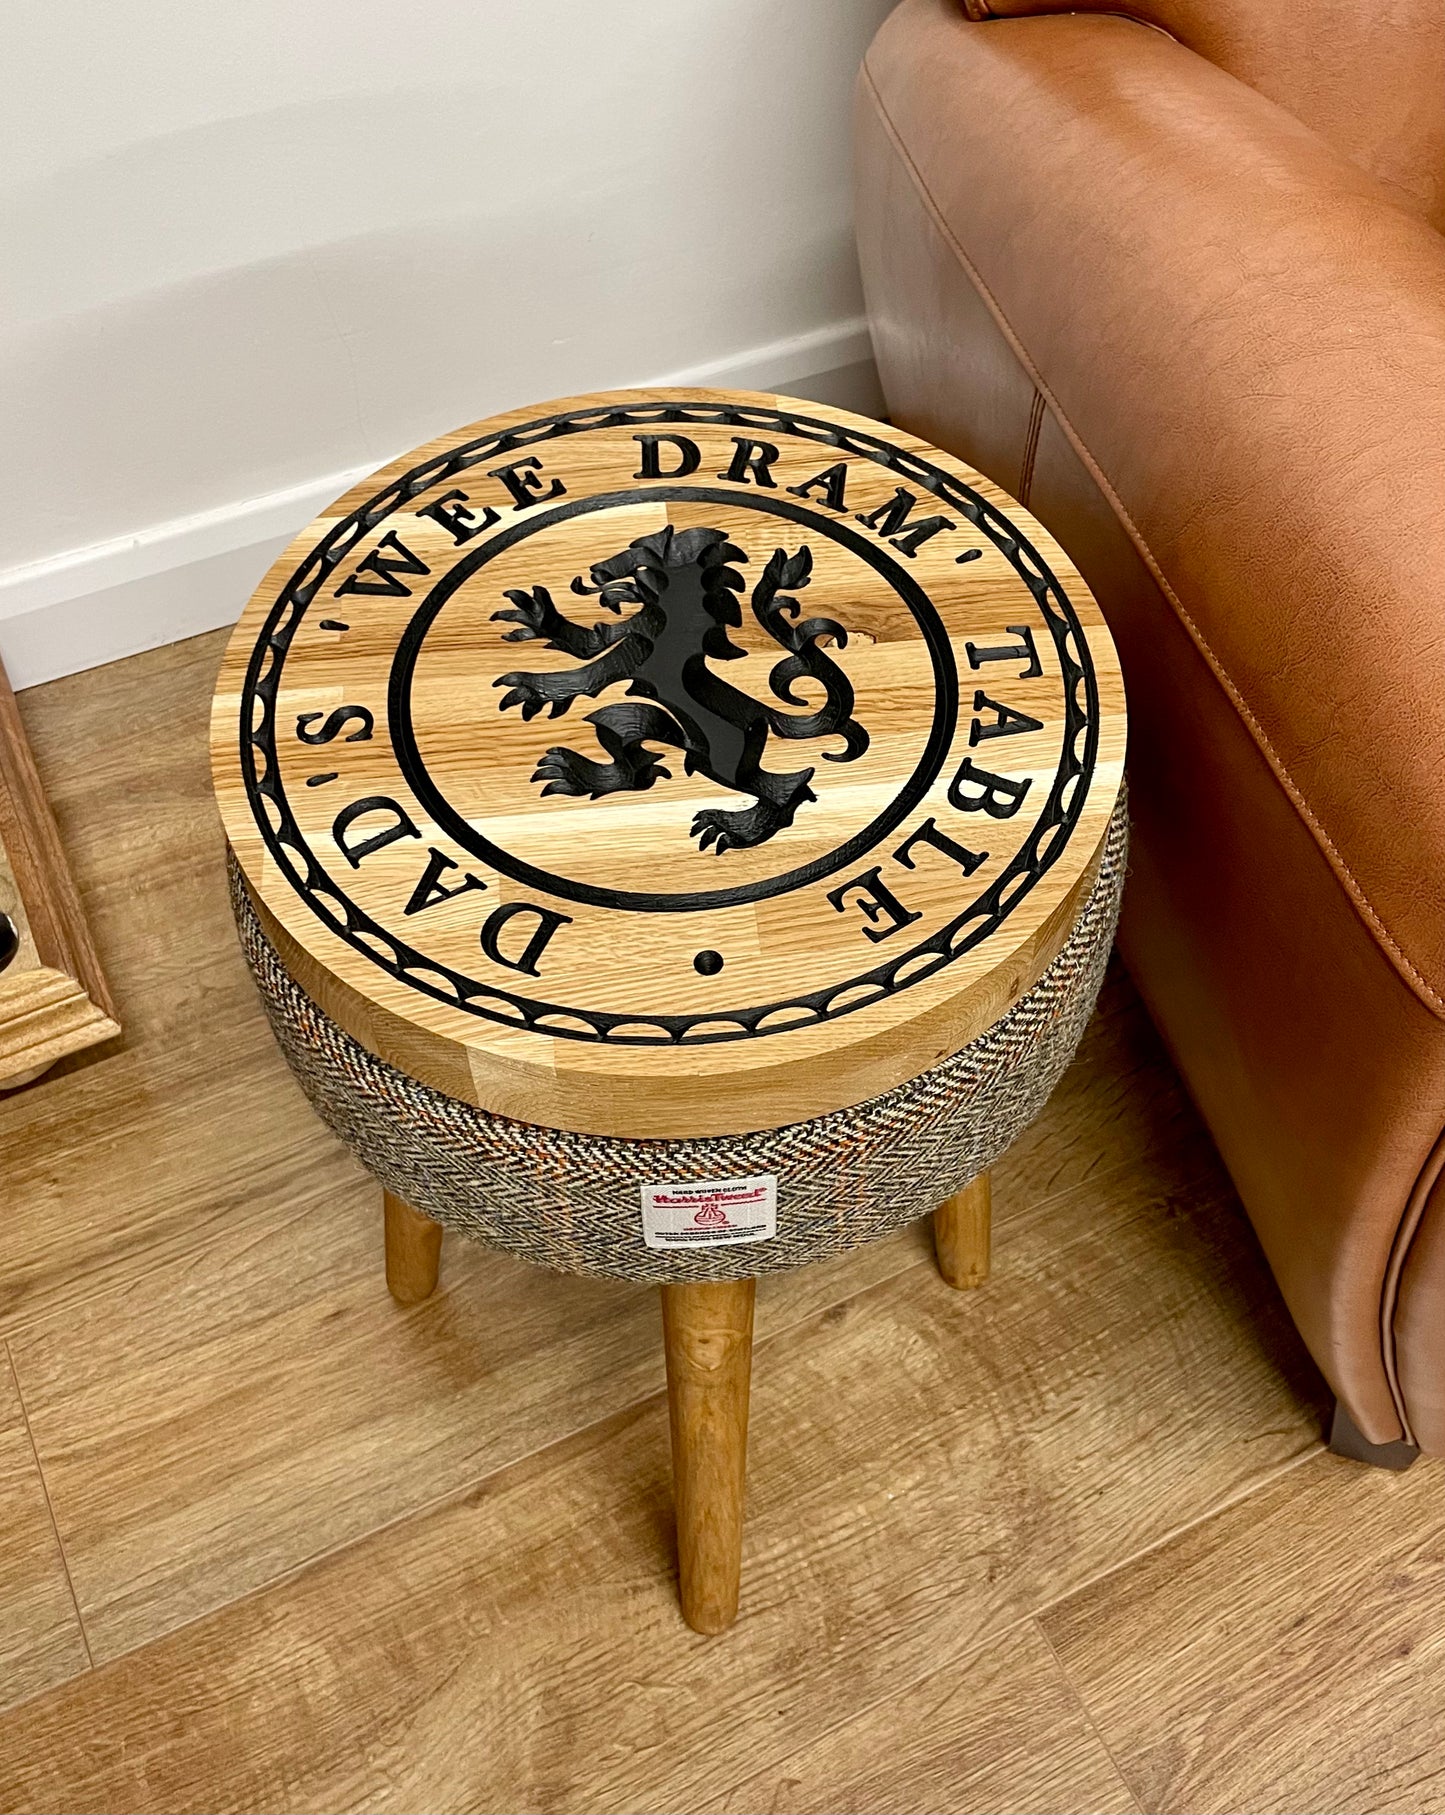 Dad’s ‘Wee Dram’ Table Footstool with Harris Tweed - Small